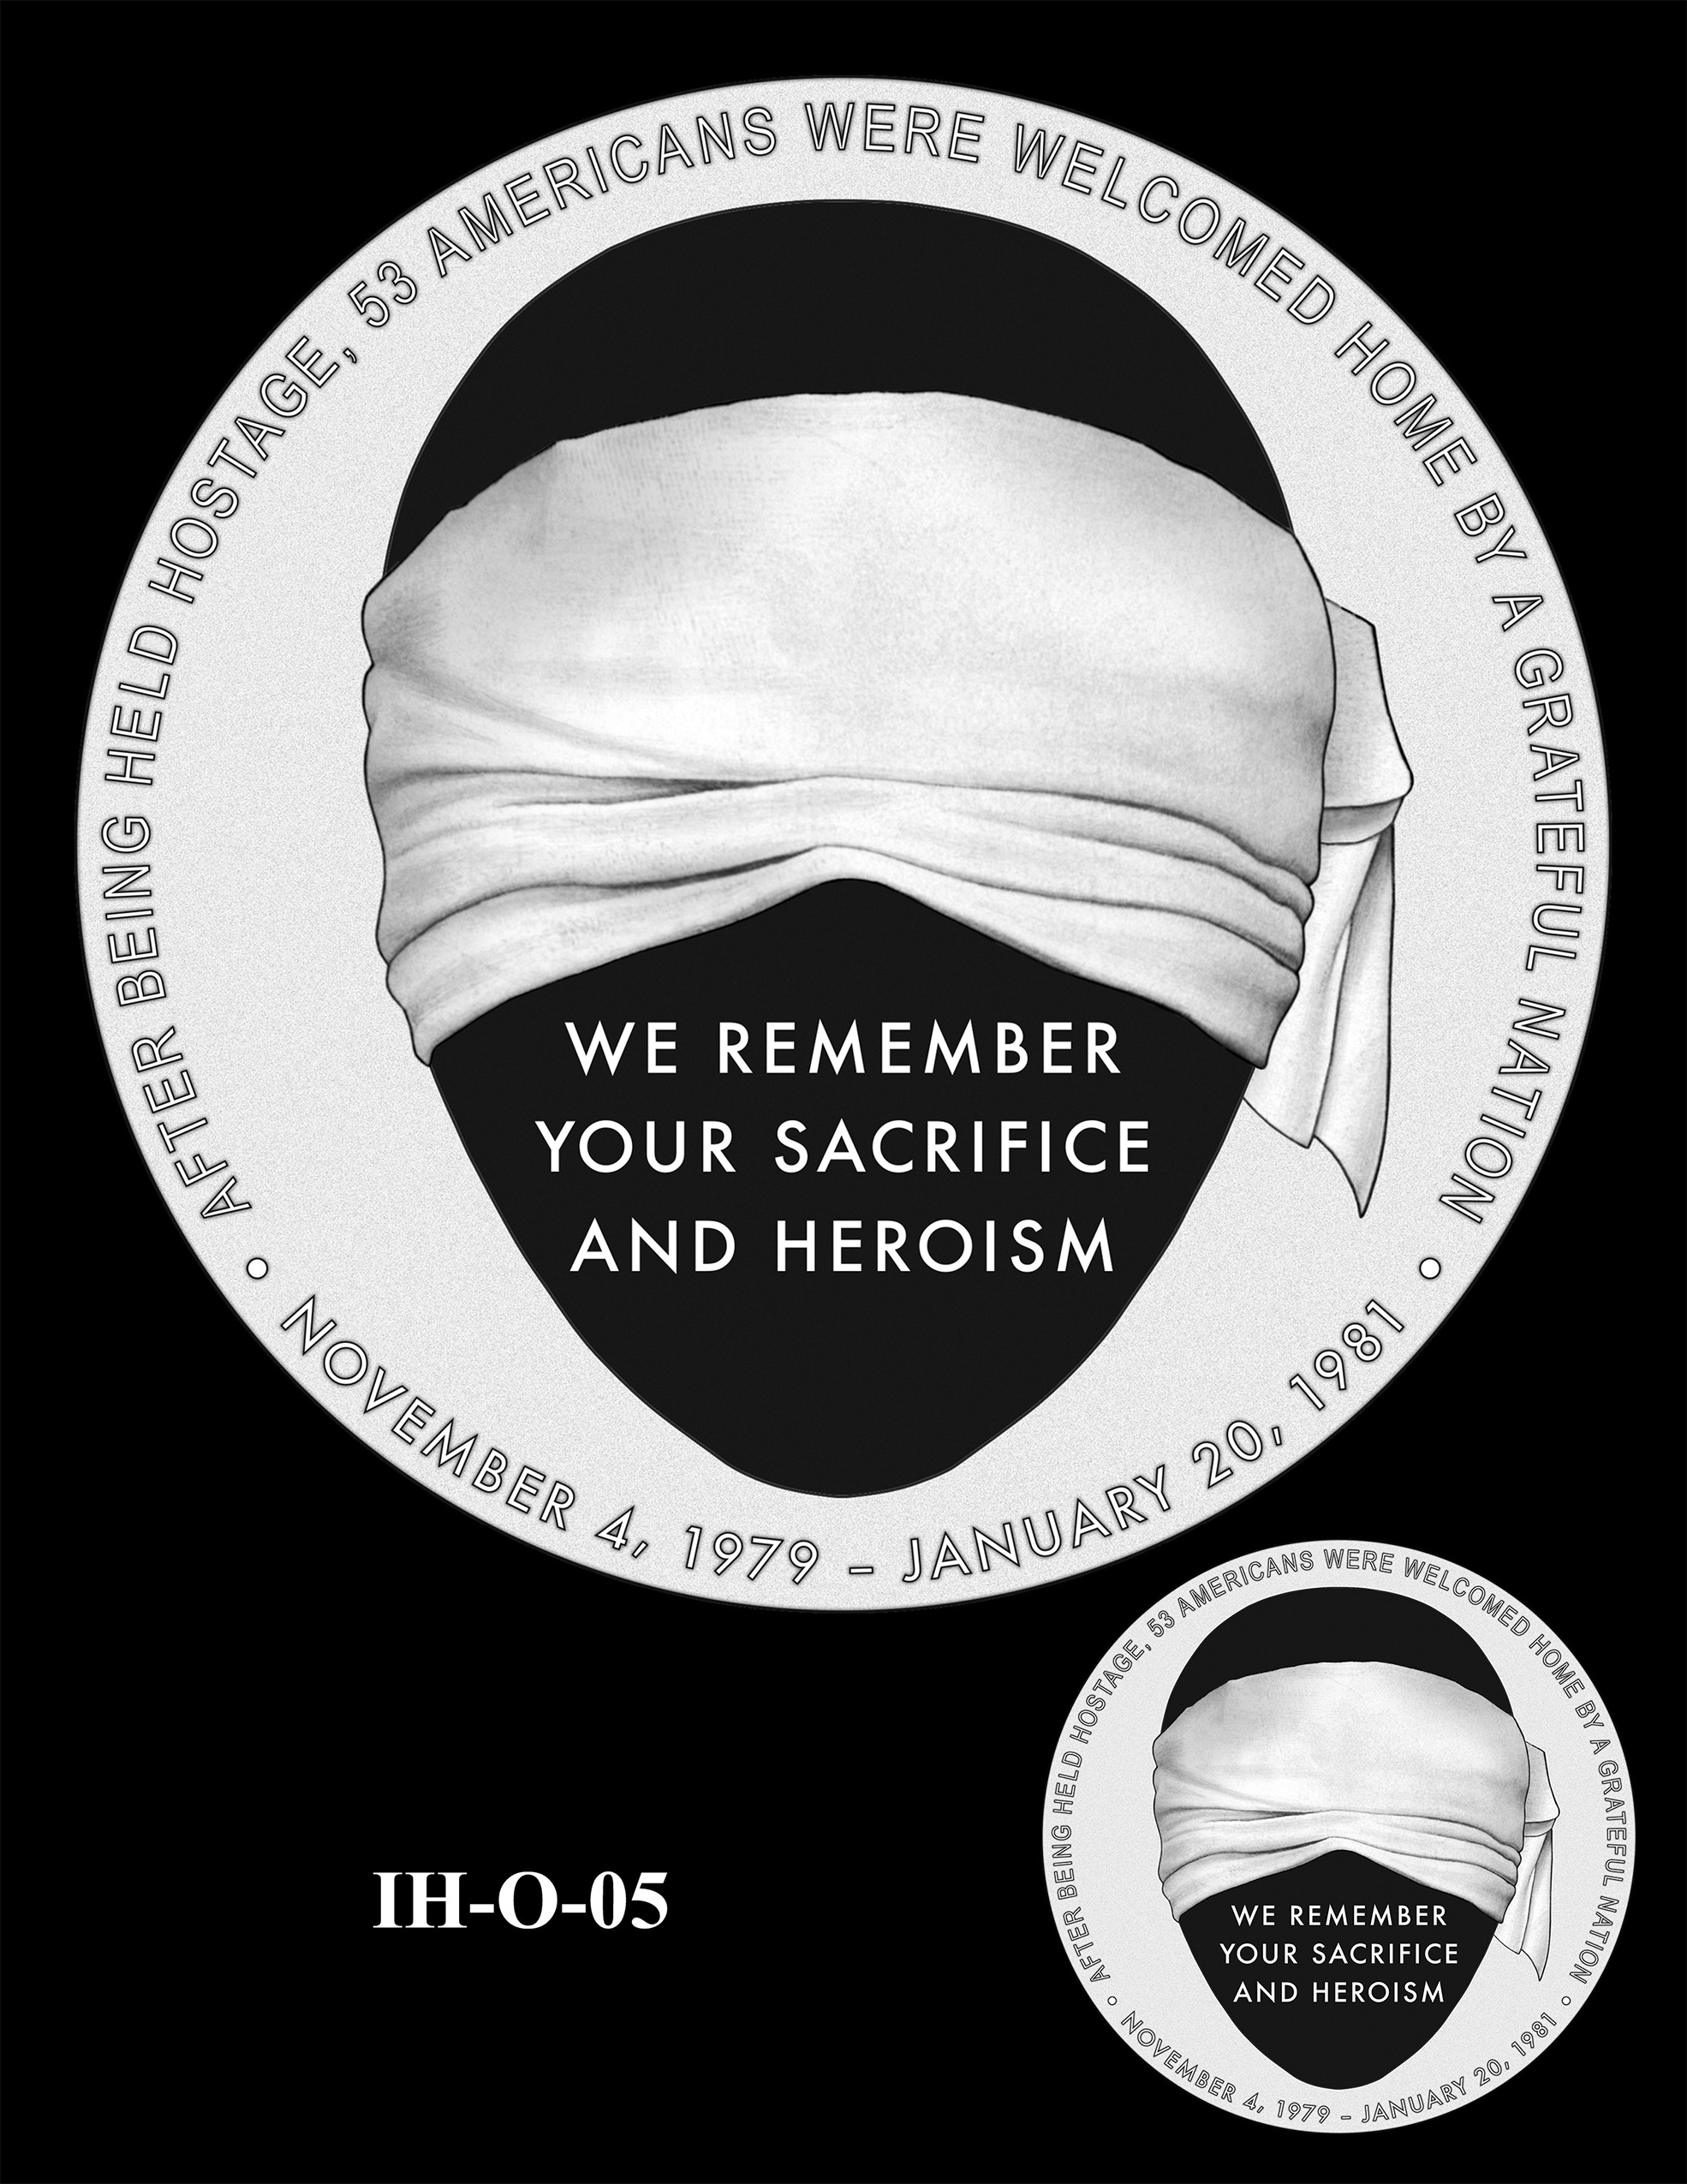 IH-O-05 -- Iran Hostages Congressional Gold Medal